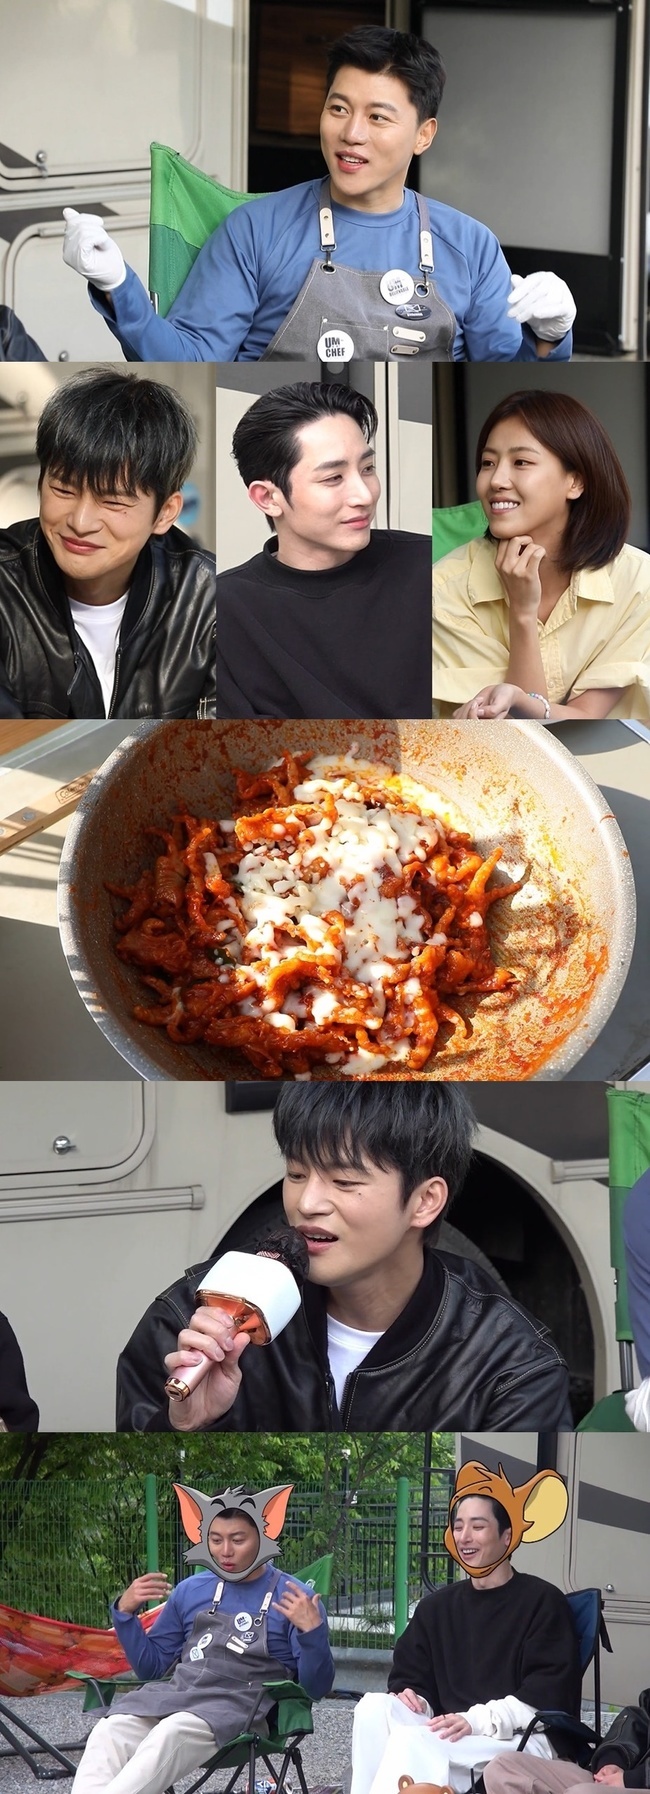 Actor Eum Moon-suk enjoys Camping Day as bread burstsMBC Point of Omniscient Interfere (planned by Park Jung-gyu / directed by Noh Si-yong, Chae Hyun-seok / hereinafter Point of Omniscient Interfere) will be broadcast on May 22nd. In the 154th, Eum Moon-suks laughing full-scale camping day with super-class guests Seo In-guk and Lee Soo-hyuk is drawn.On this day, Eum Moon-suk invites Seo In-guk, Lee Soo-hyuk and Badabin to Camping Car.Eum Moon-suk is ambitiously transformed into a mum chef, and goes on cheese chicken feet and chicken dishes.Guests were impressed by the real delicious after tasting the Eum Moon-suk ticket camping dish.The mood was also a bit cheerful. Eum Moon-suk was said to have sweated in the corner.I was embarrassed and embarrassed, and suddenly I made the Camping Field into a laughing sea. The guests told Eum Moon-suk, Brother, honestly, is it annoying?I ask a question of stone fastball and laugh. What happened to Eum Moon-suks Camping Field?